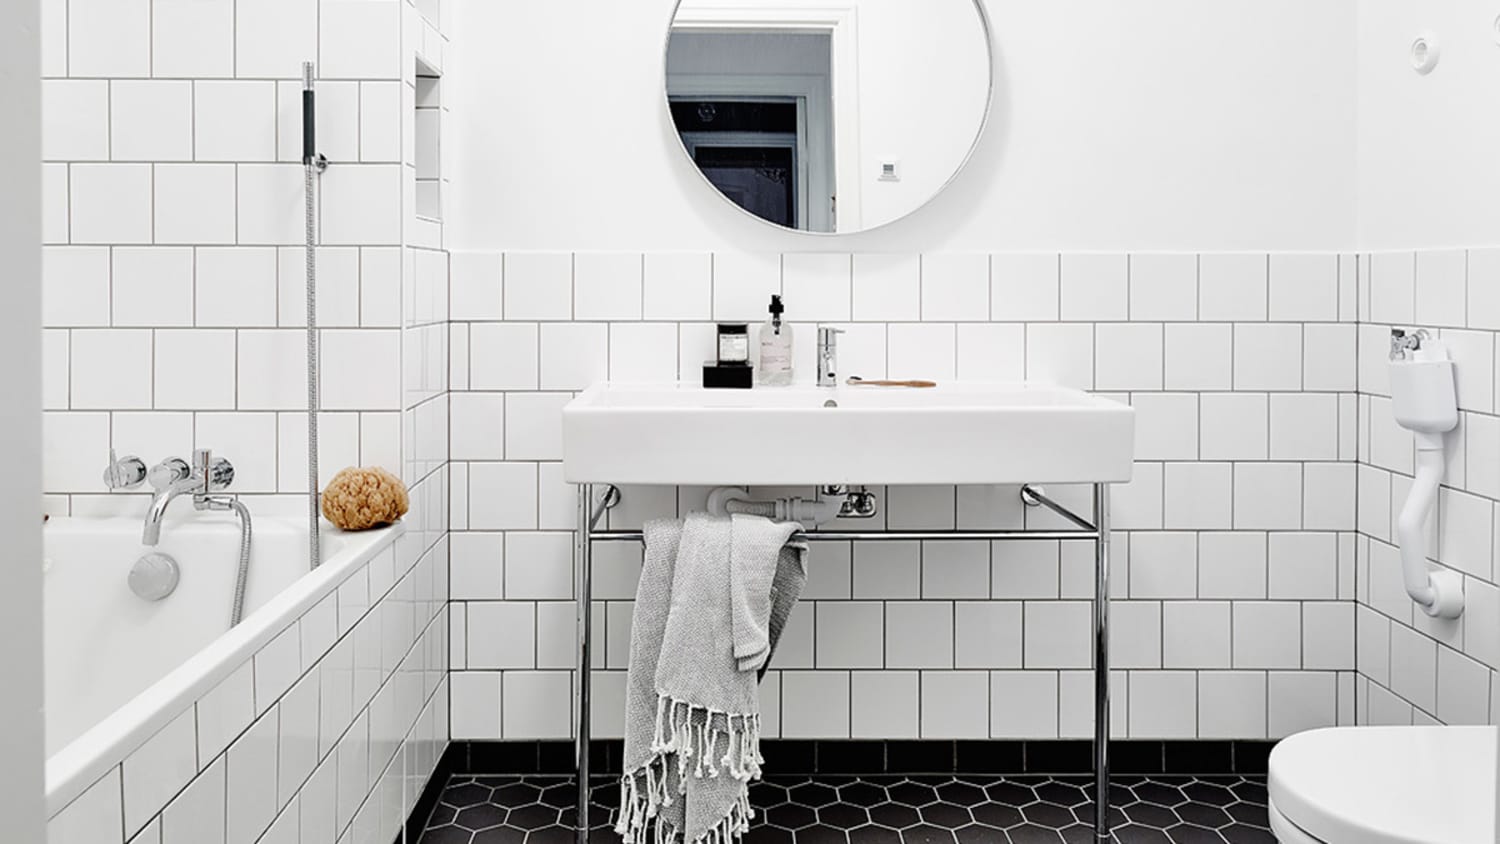 White Square Tiles: A Great Alternative To Subway Tile | Apartment Therapy